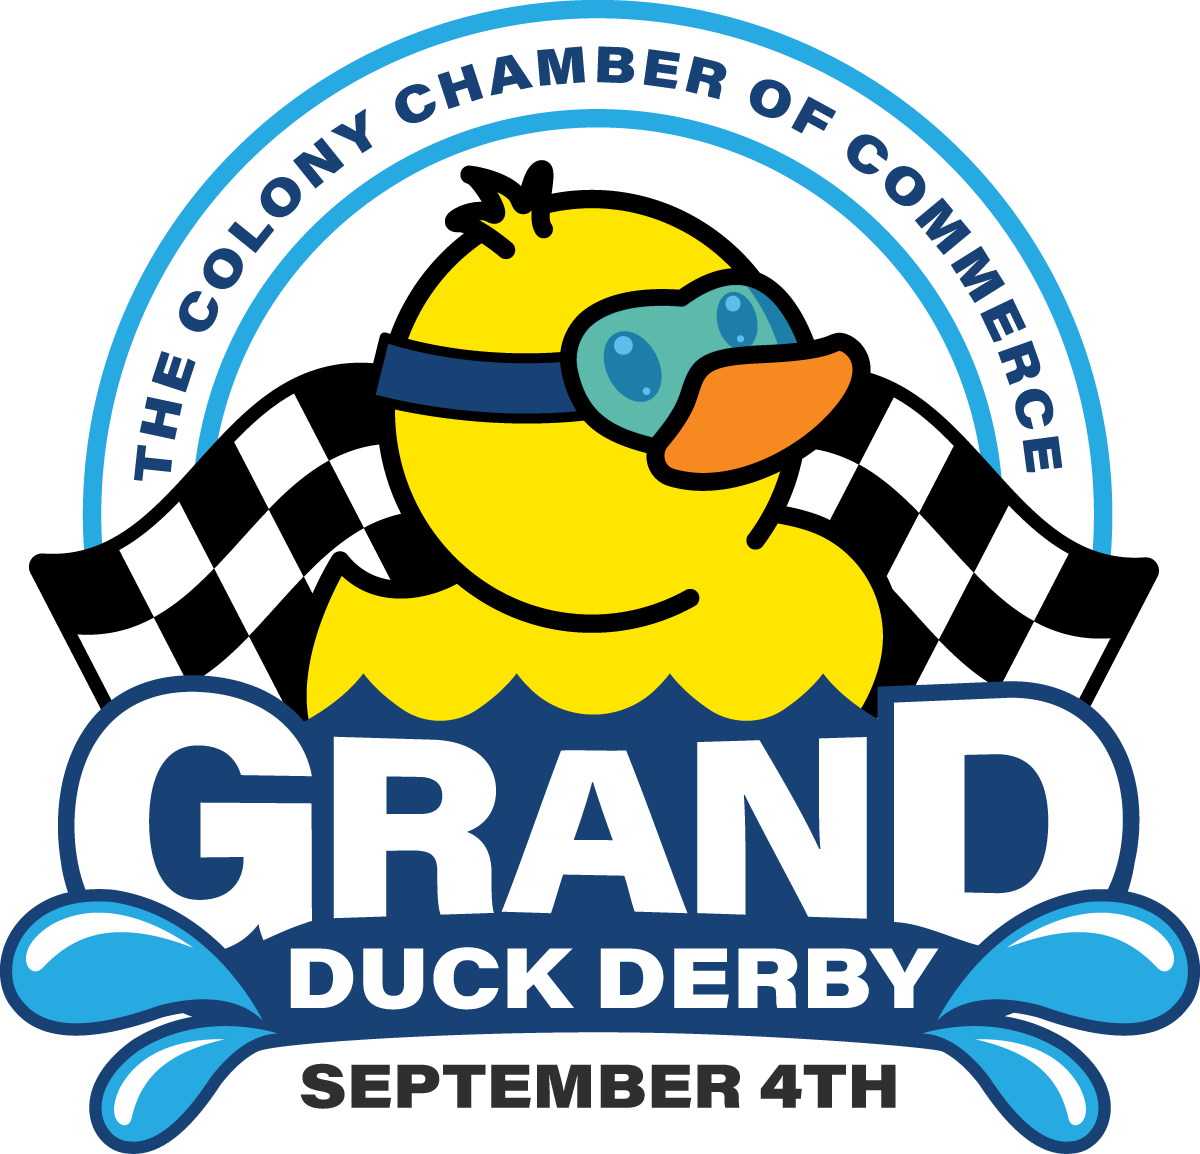 The Grand Duck Derby